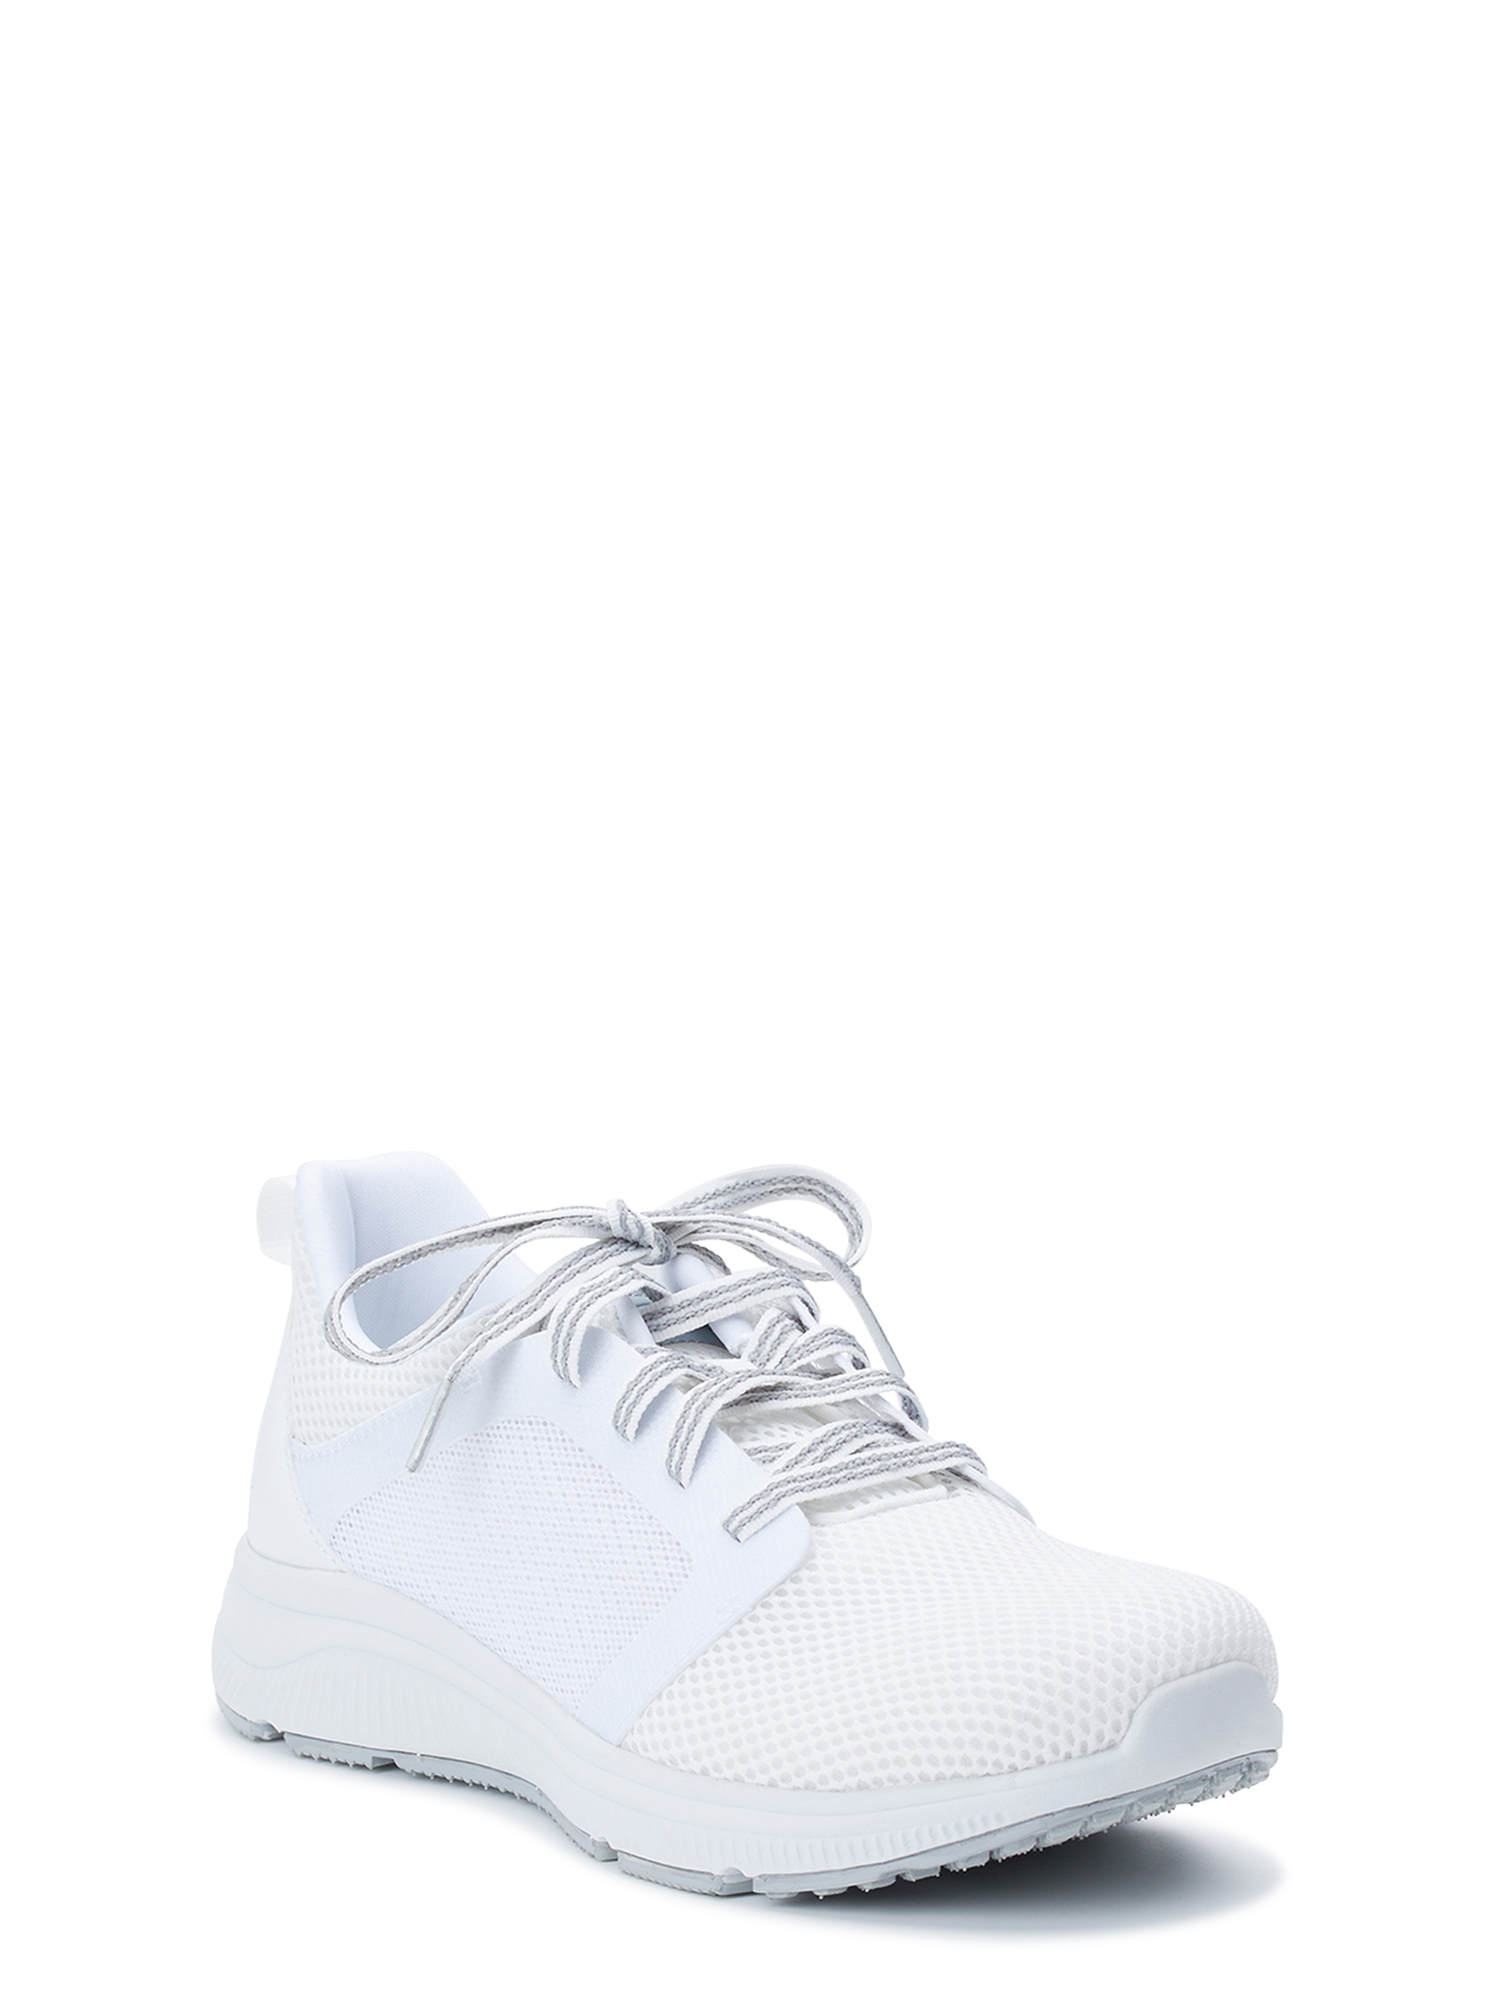 Avia Women's Deluxe Athletic Sneaker, Wide Width Available - image 1 of 5